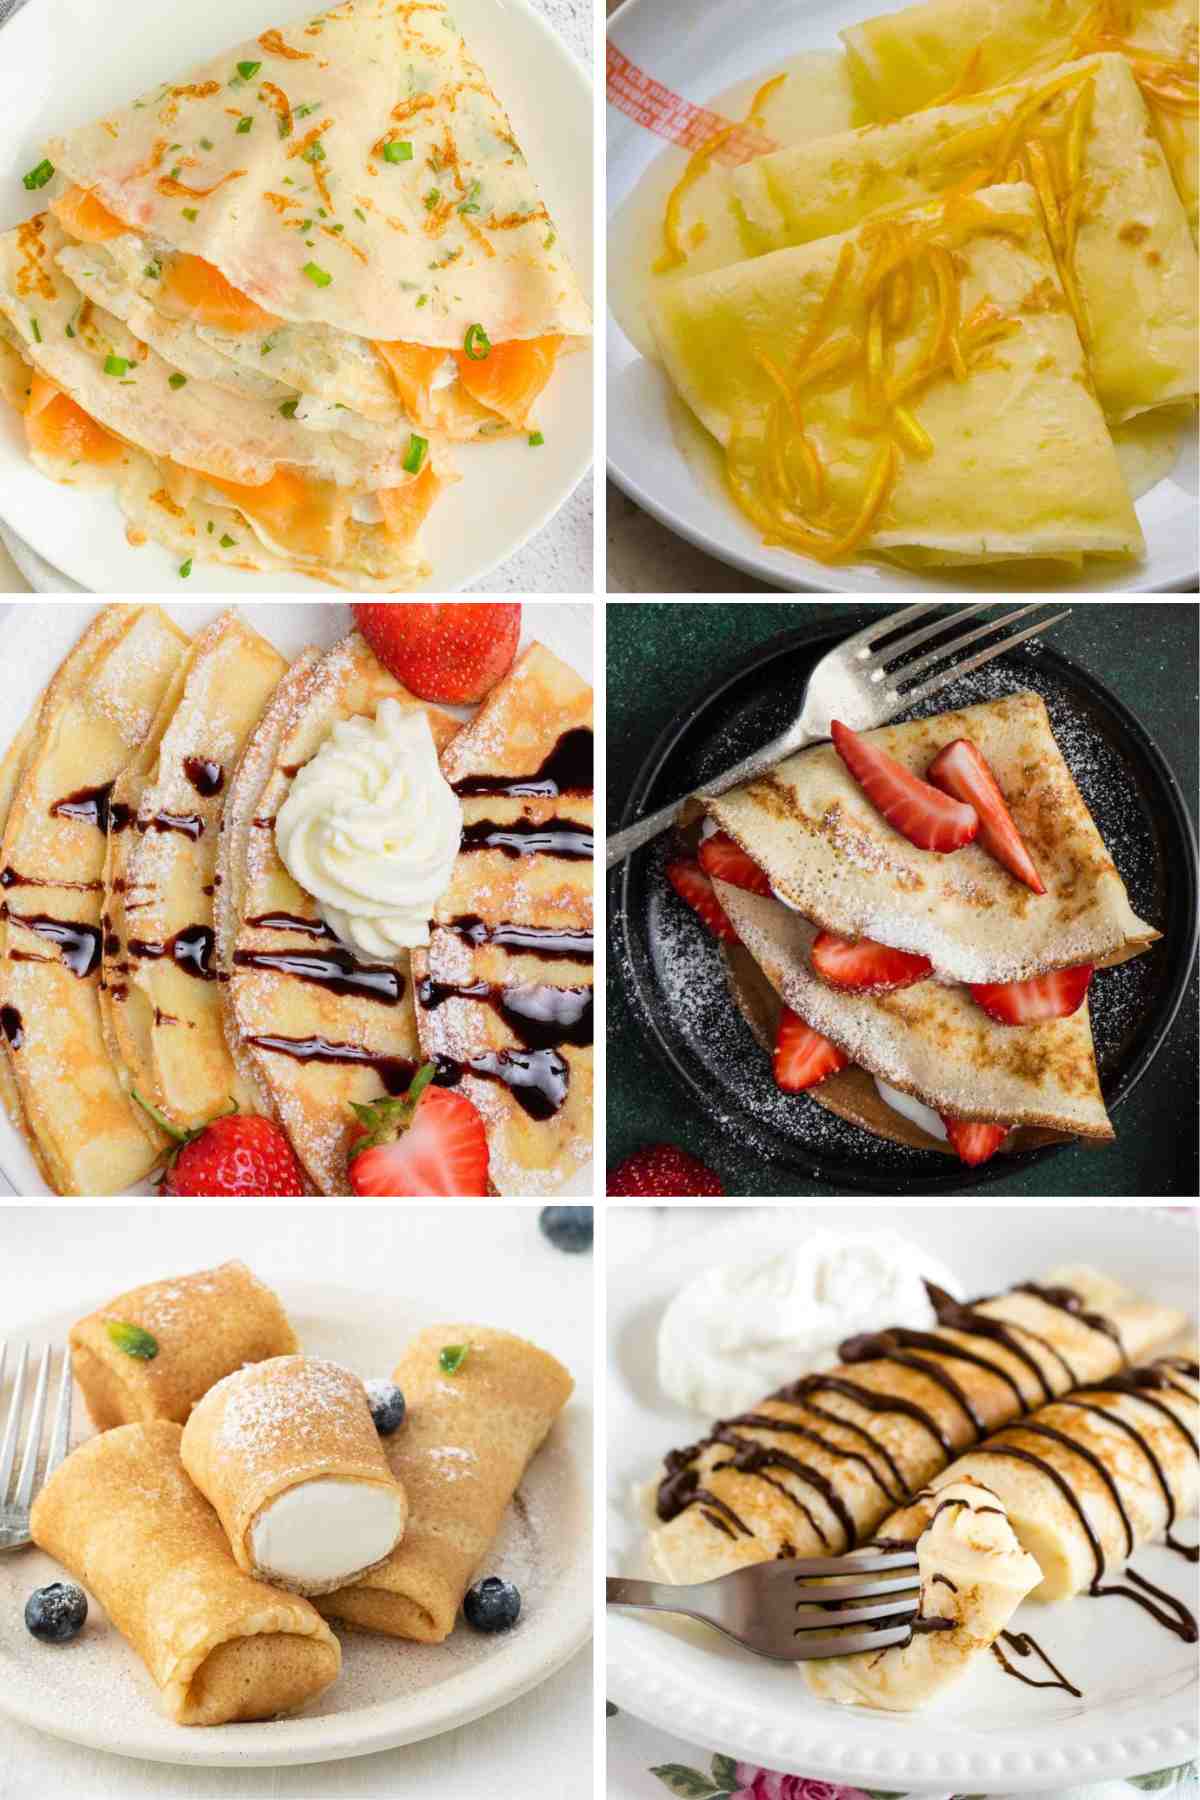 Below you will find 31 of the Best Crepe Filling Ideas for breakfast, lunch and dinner! Plus, if you like them on the sweeter side, there are dessert recipes too!